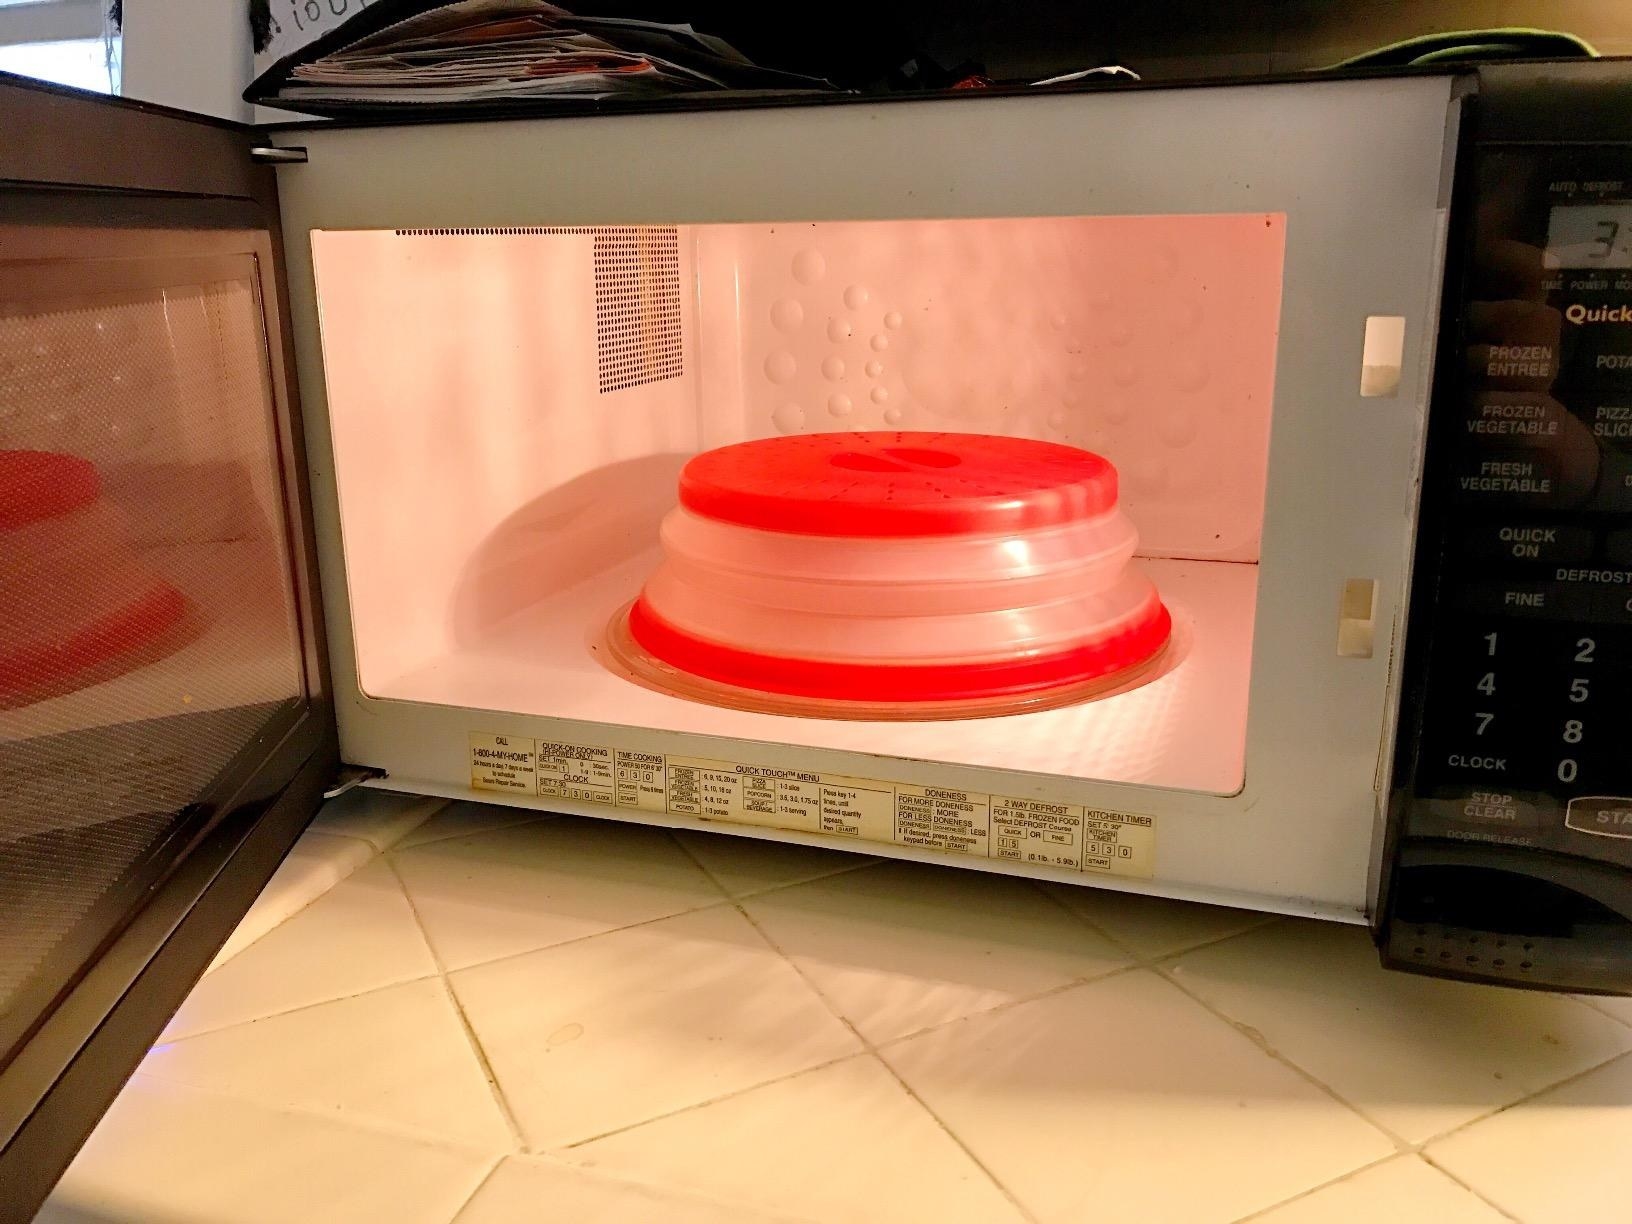 A reviewer's photo of the red microwave food cover